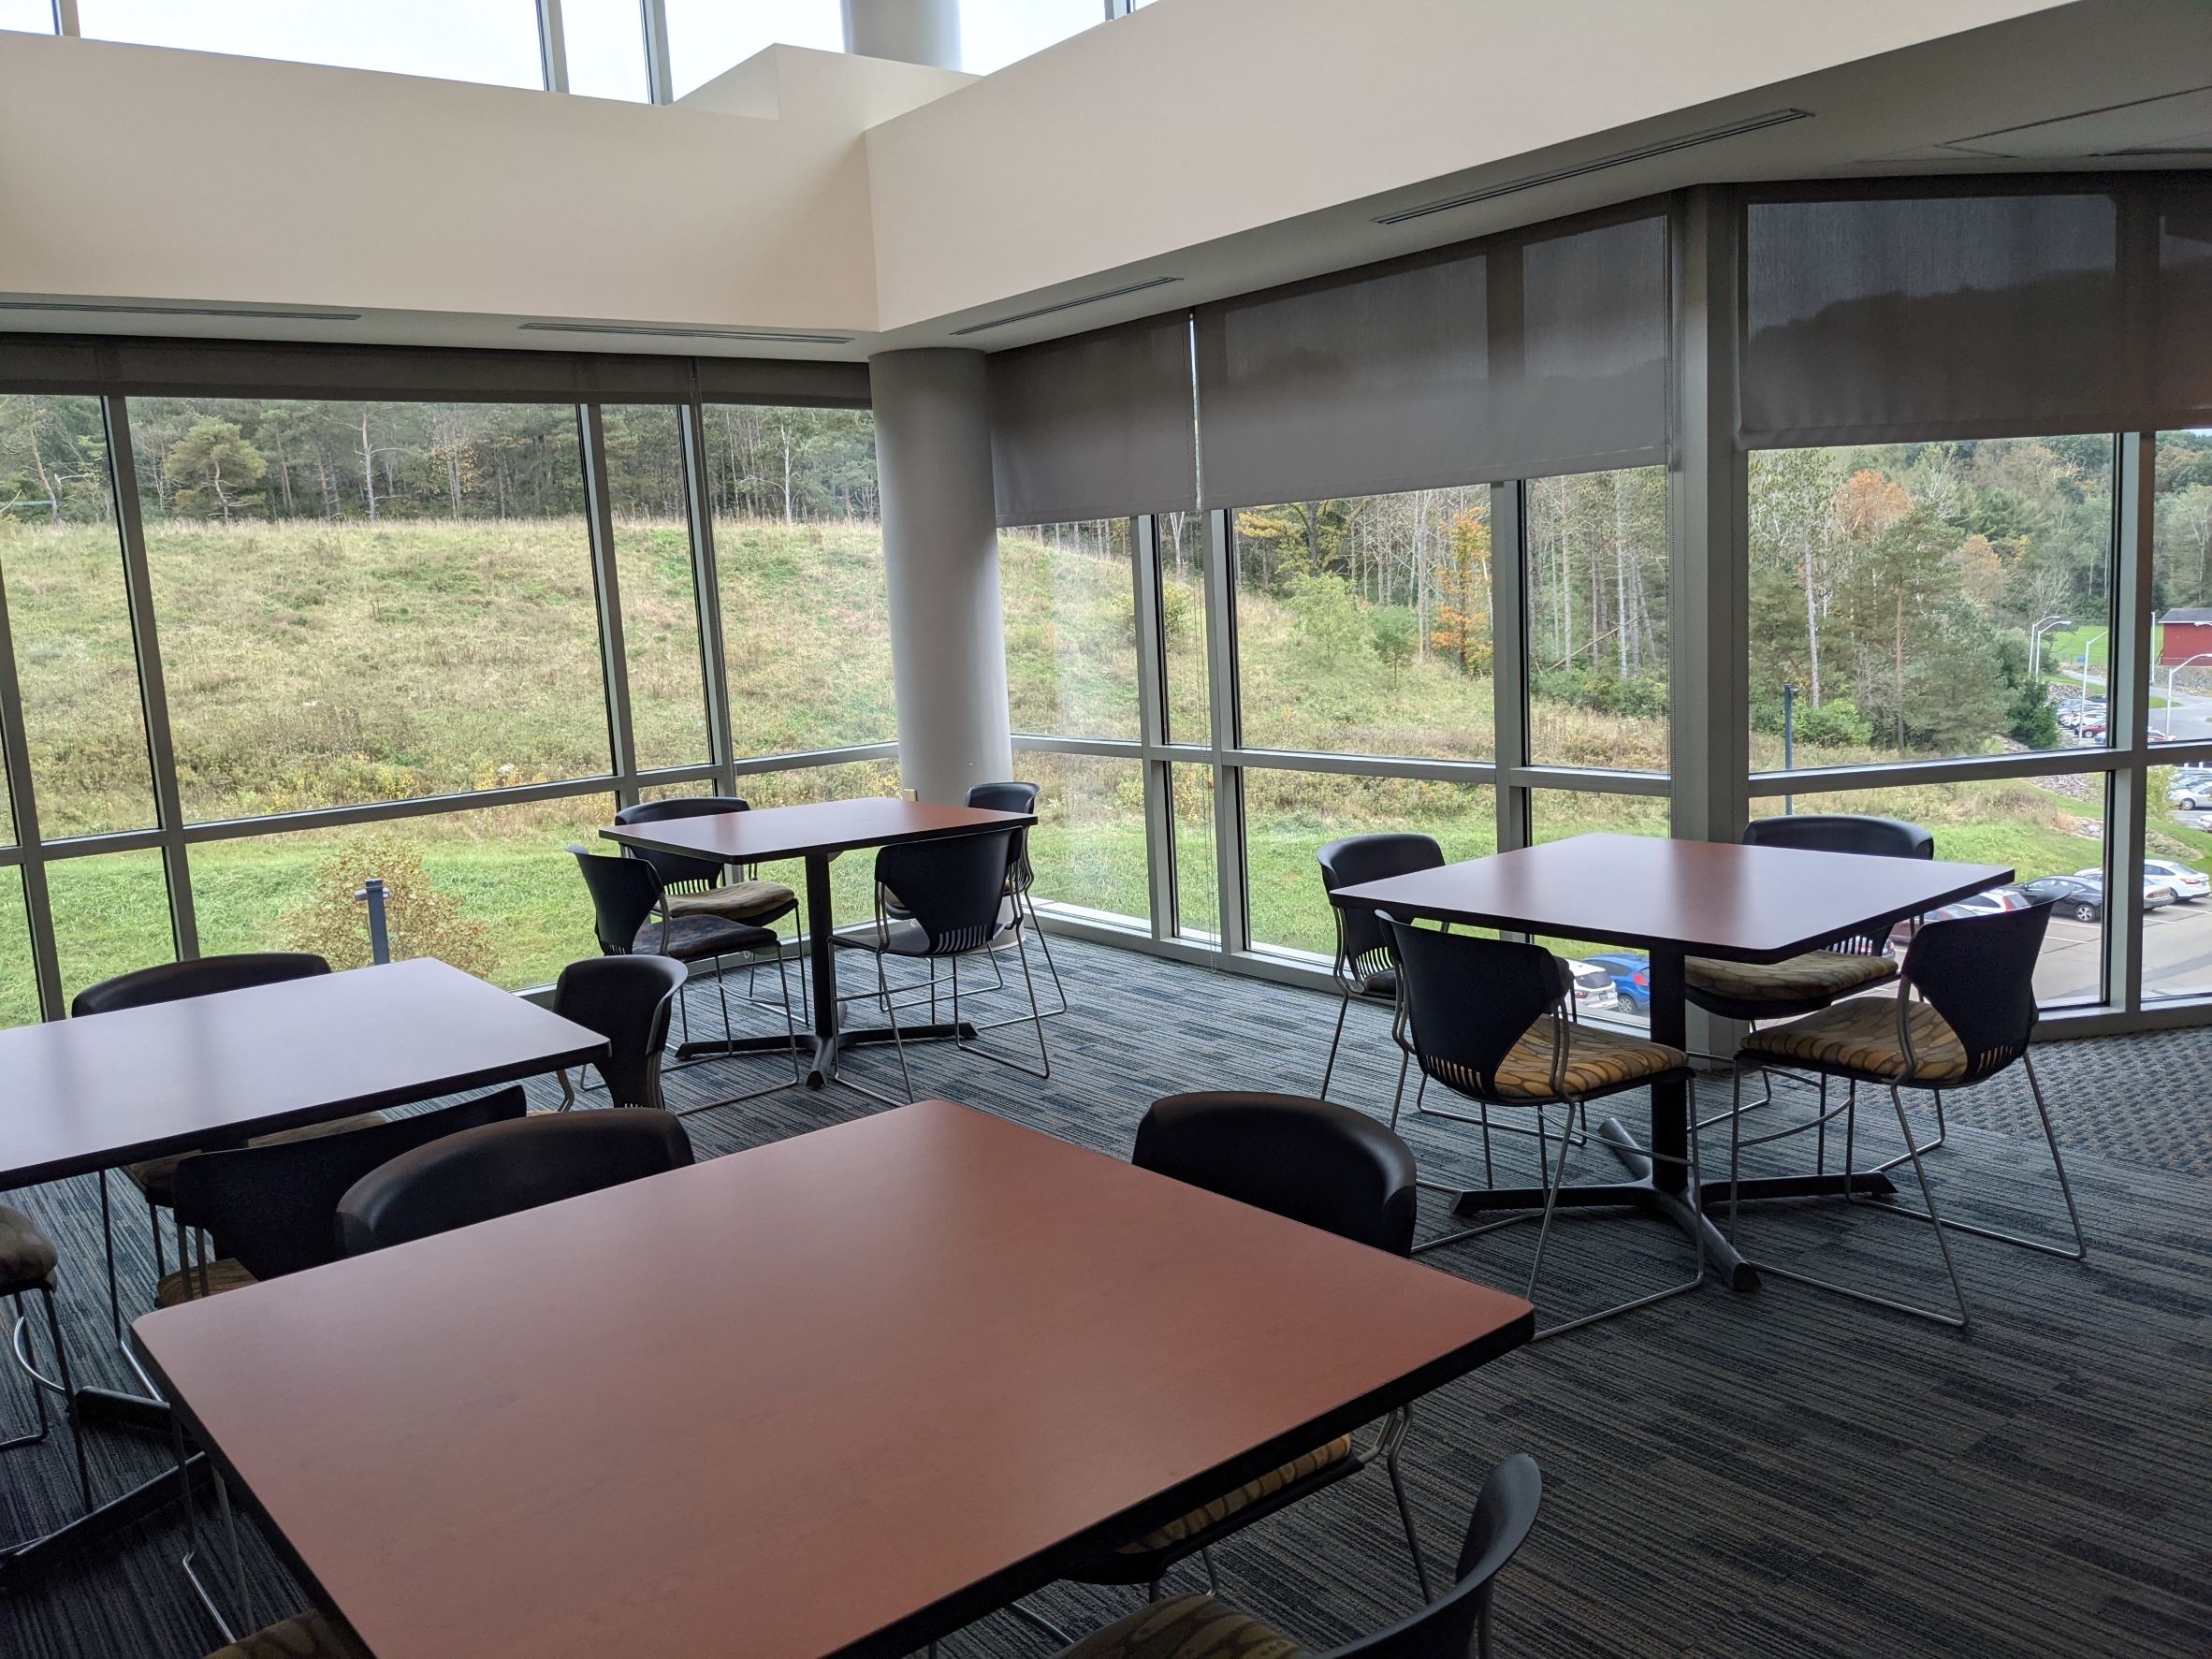 study lounge with tables and chairs, modern carpeting and clerestory windows above, views of wooded area beyond windows